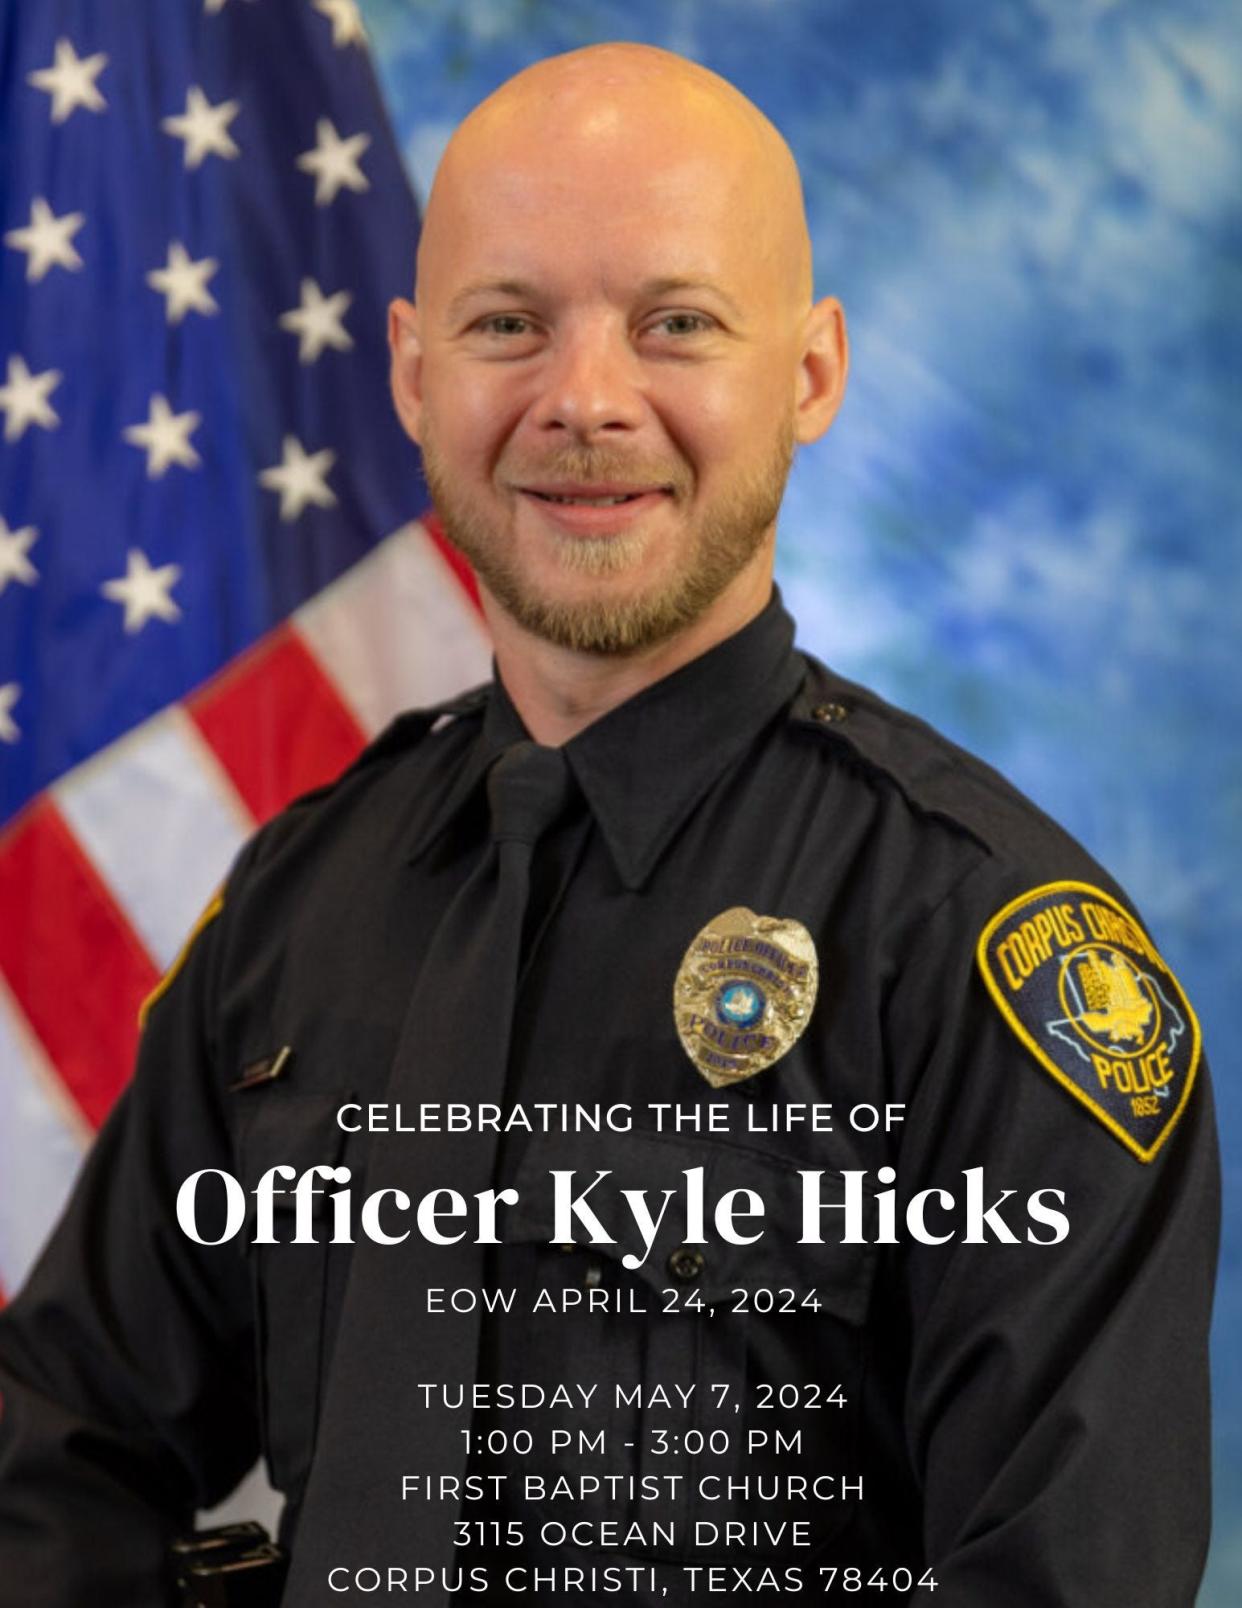 A Celebration of Life will be held in honor of fallen Corpus Christi police officer Kyle Hicks on May 7.